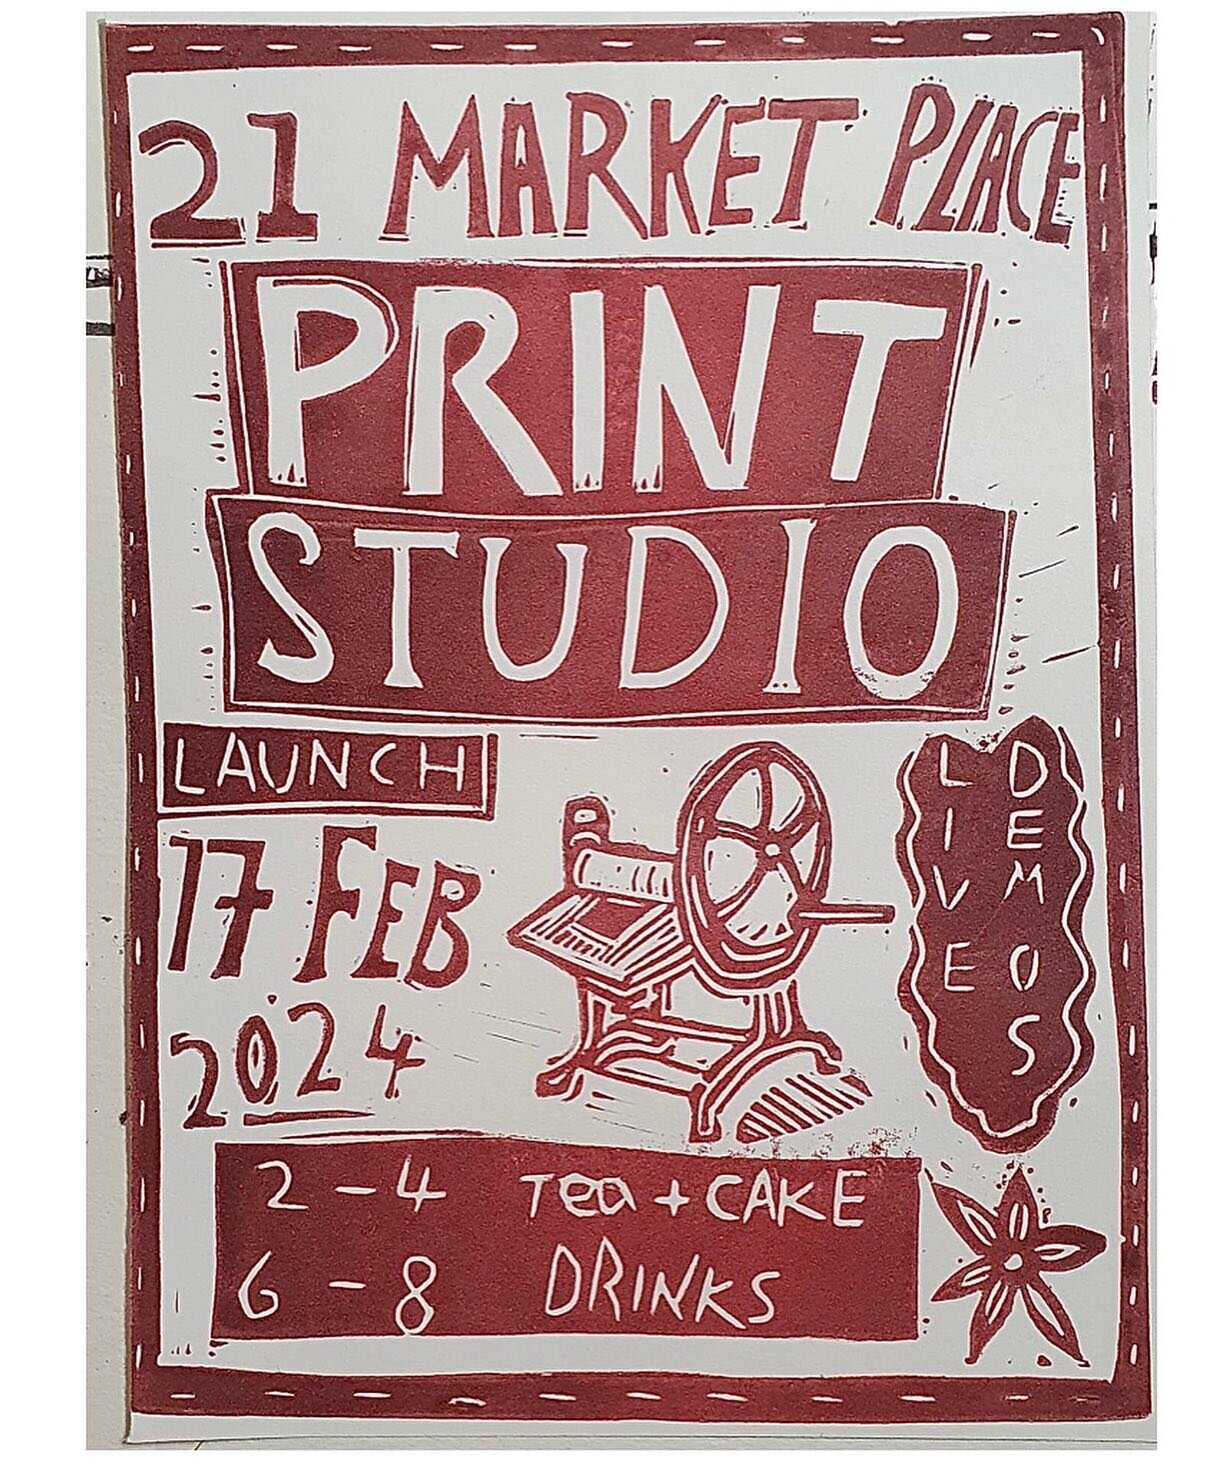 Join us on Saturday 17th Feb for the launch of the Market Place Print Studio! Booking for workshops and open access will also be live on our new website and we&rsquo;ll have printing demos too. See timings below and see you there 🎉

2-4pm tea + cake